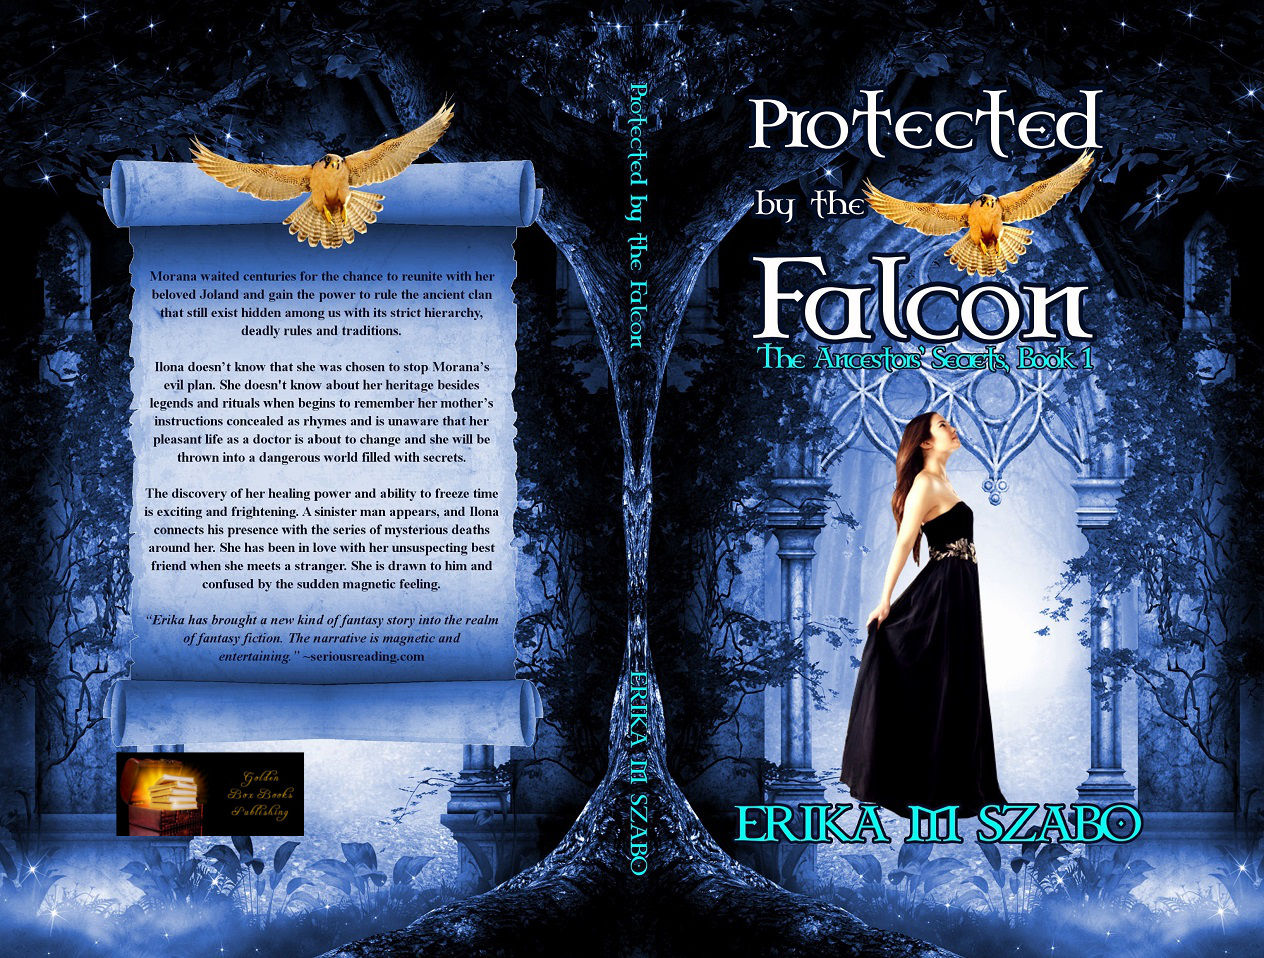 cover-protected-by-the-falcon-the-ancestors-secrets-1-by-erika-szabo